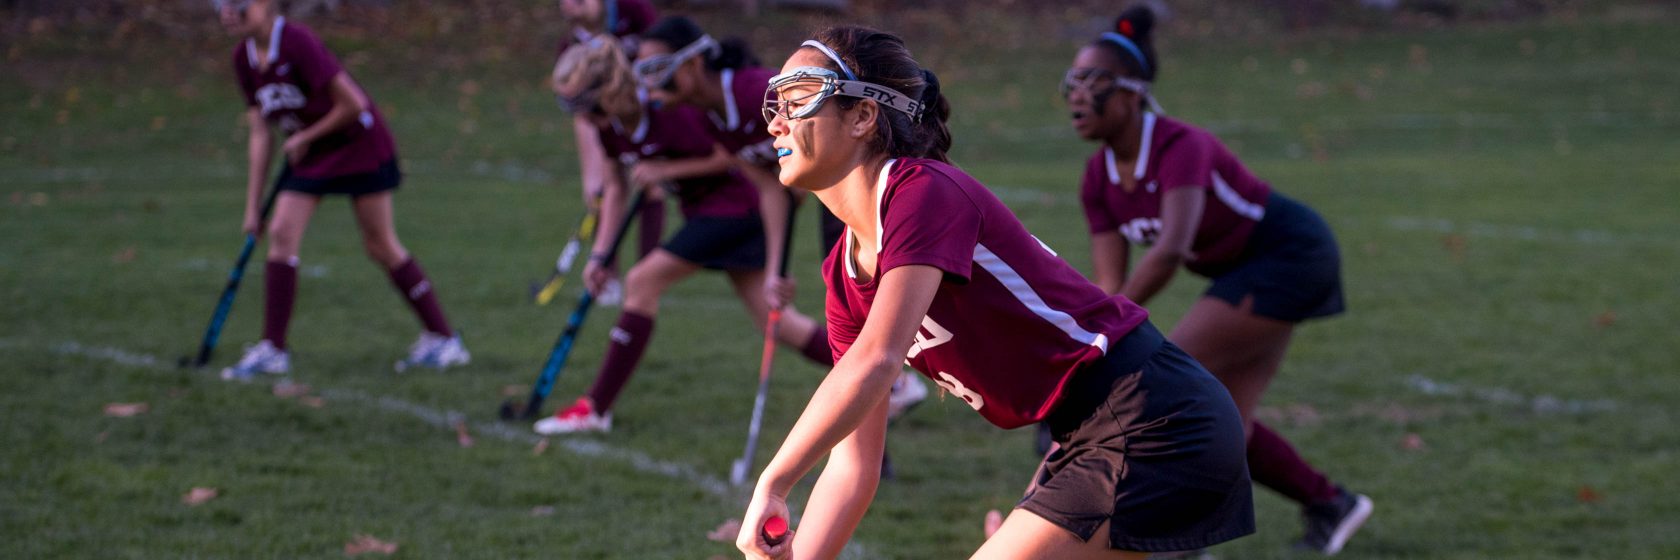 A student playing field hockey.